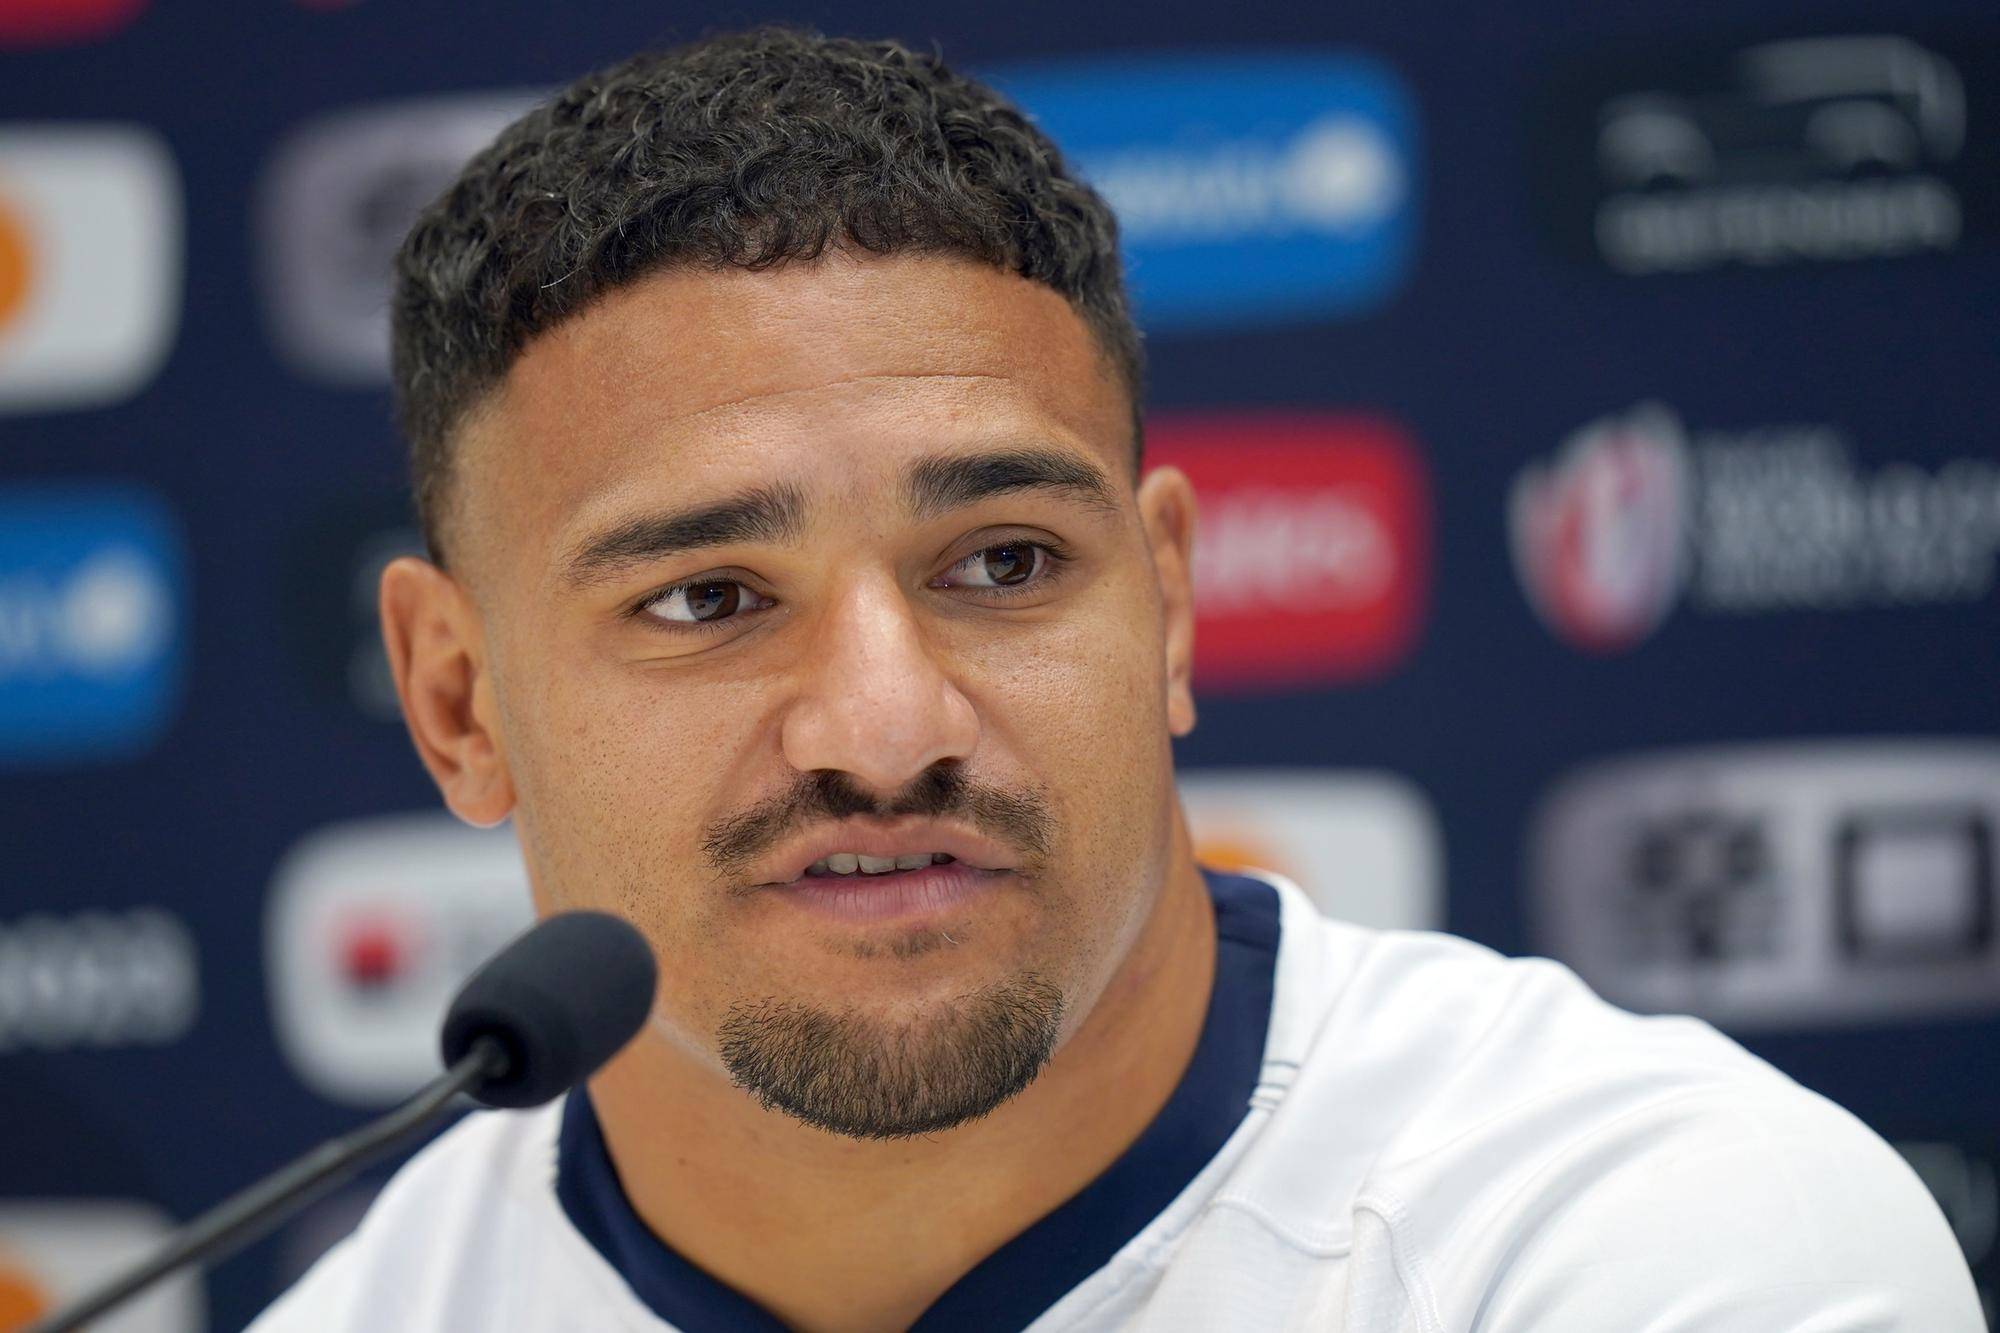 Scotland's Sione Tuipulotu during a press conference at the Stade de Nice ahead of the match against Tonga in Pool B of the Rugby World Cup.  (Picture: Adam Davy/PA Wire)